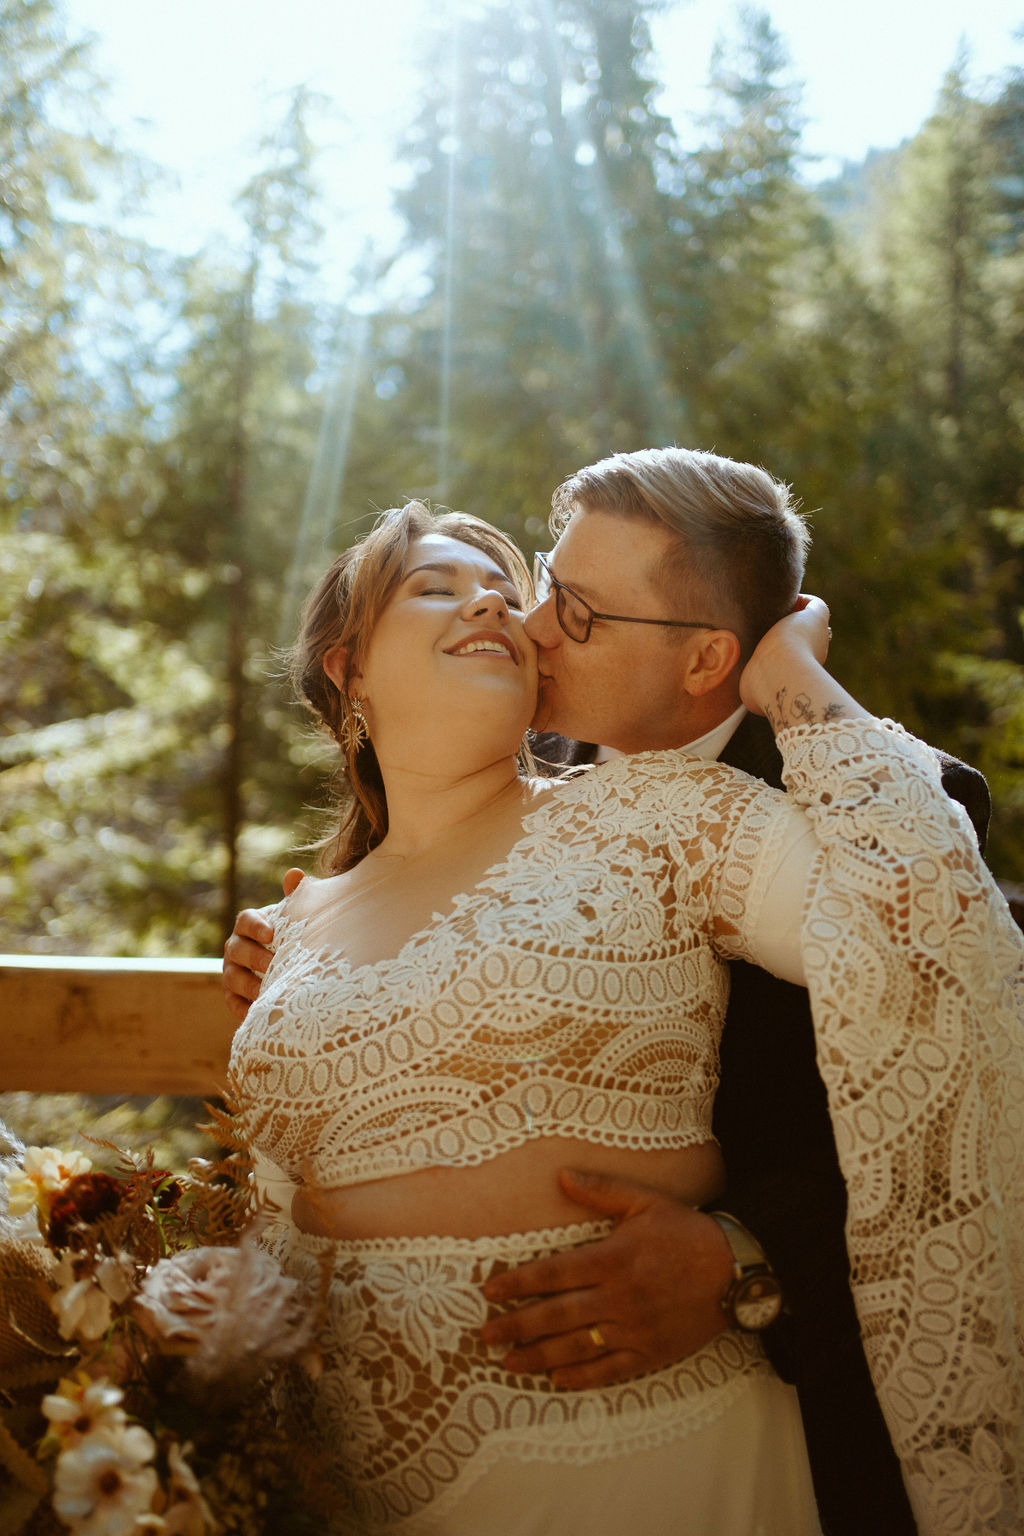 The groom is kissing the bride as she smiles and holds his head in the forest in front of a wooden fence 